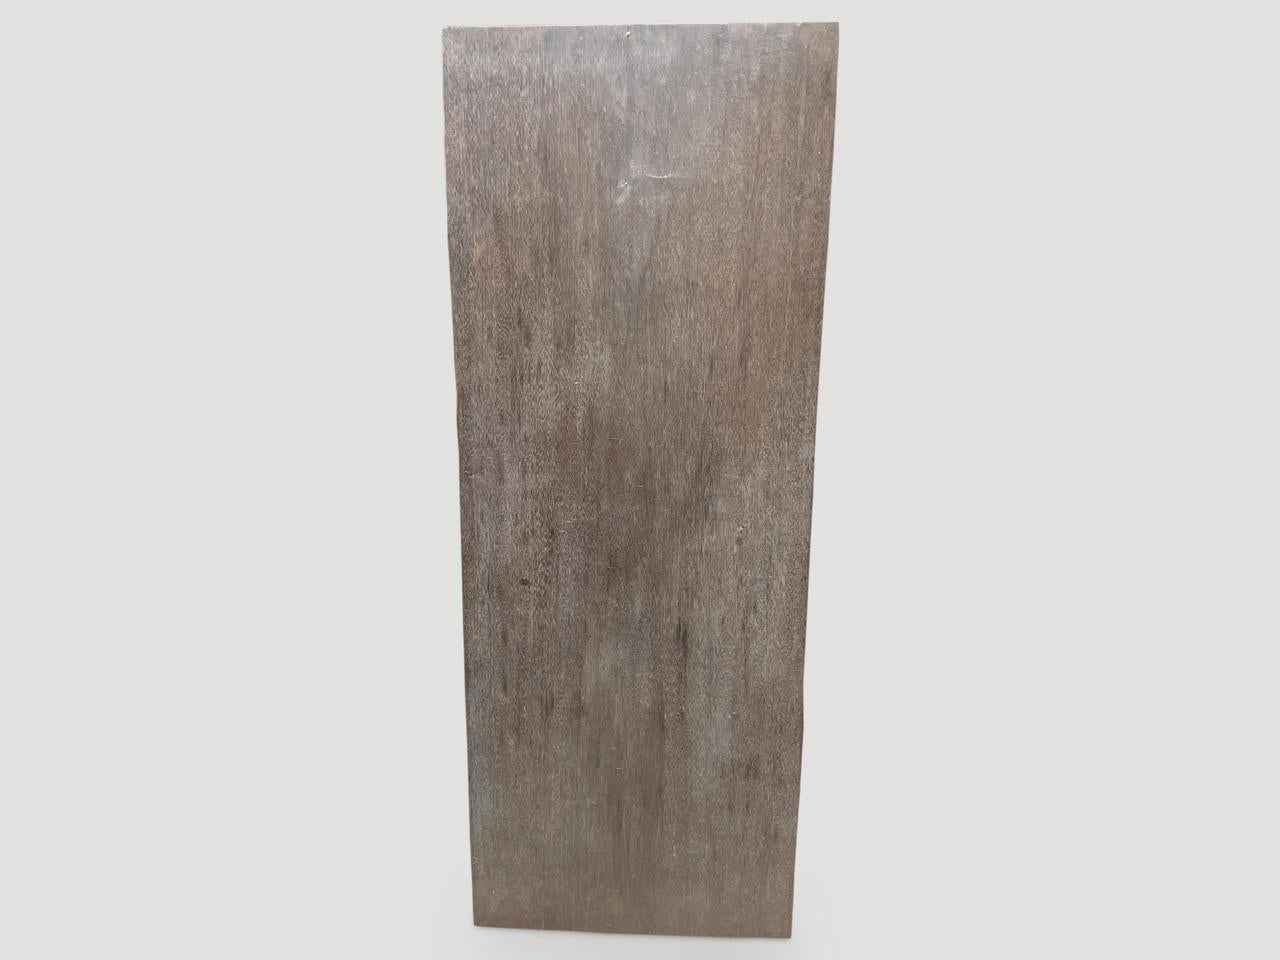 Andrianna Shamaris Nias Wood Single Panel In Excellent Condition For Sale In New York, NY